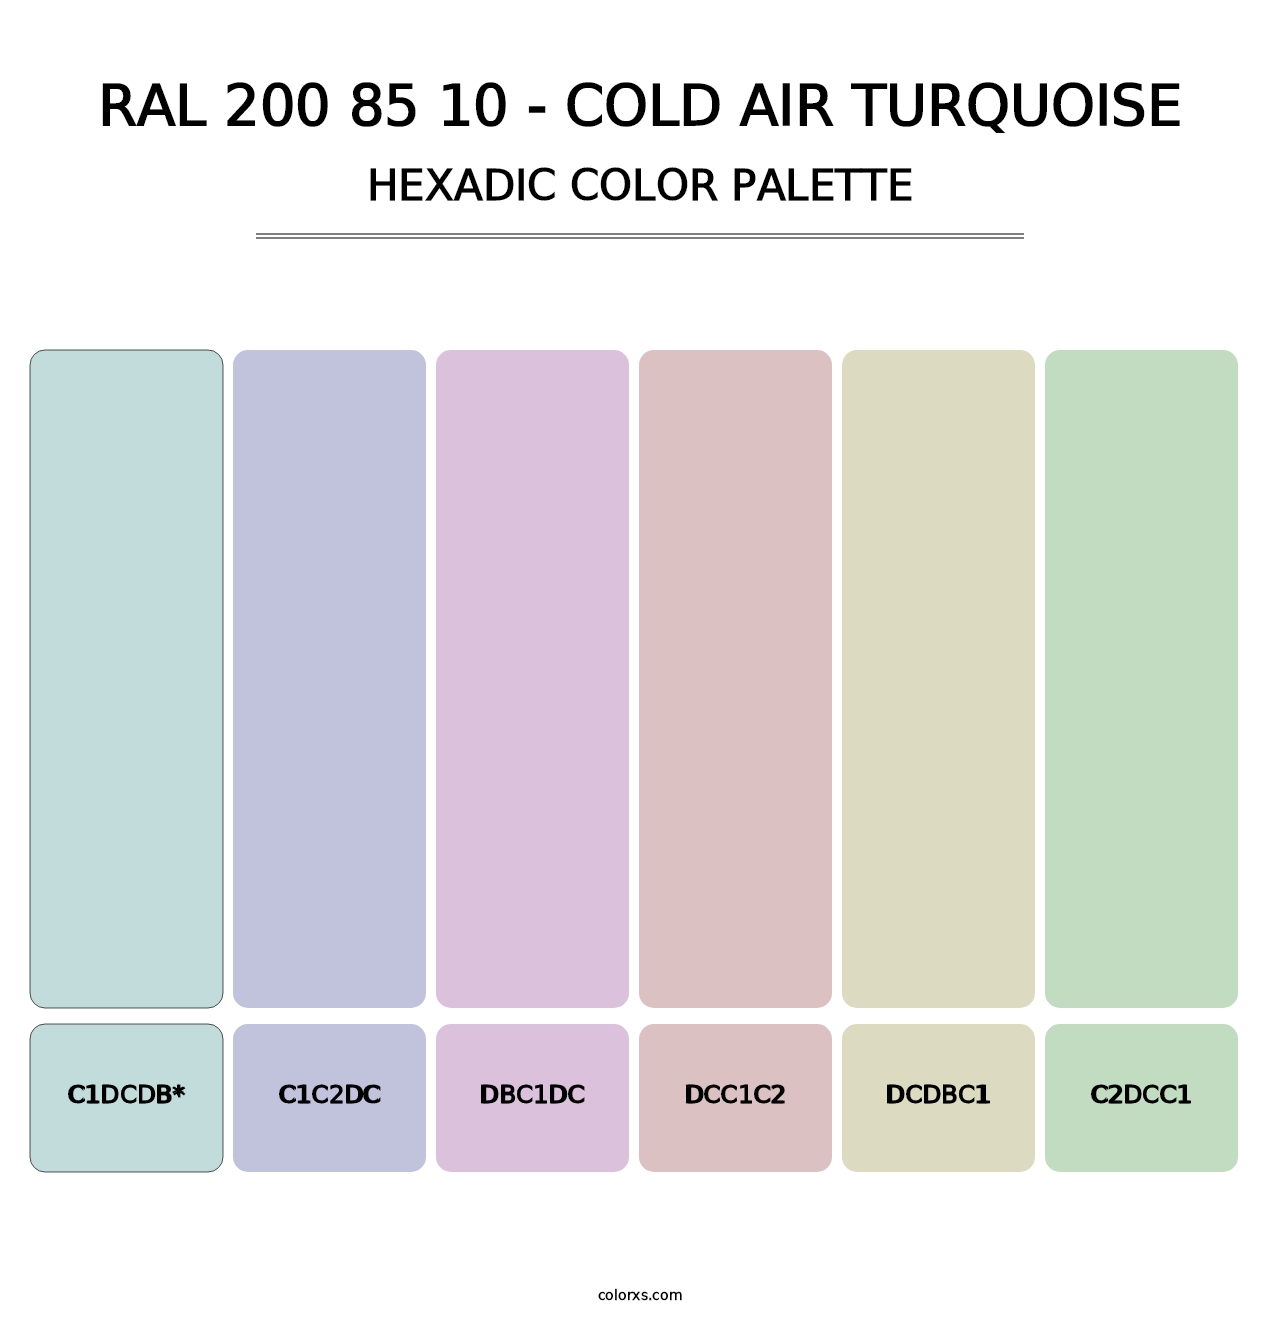 RAL 200 85 10 - Cold Air Turquoise - Hexadic Color Palette